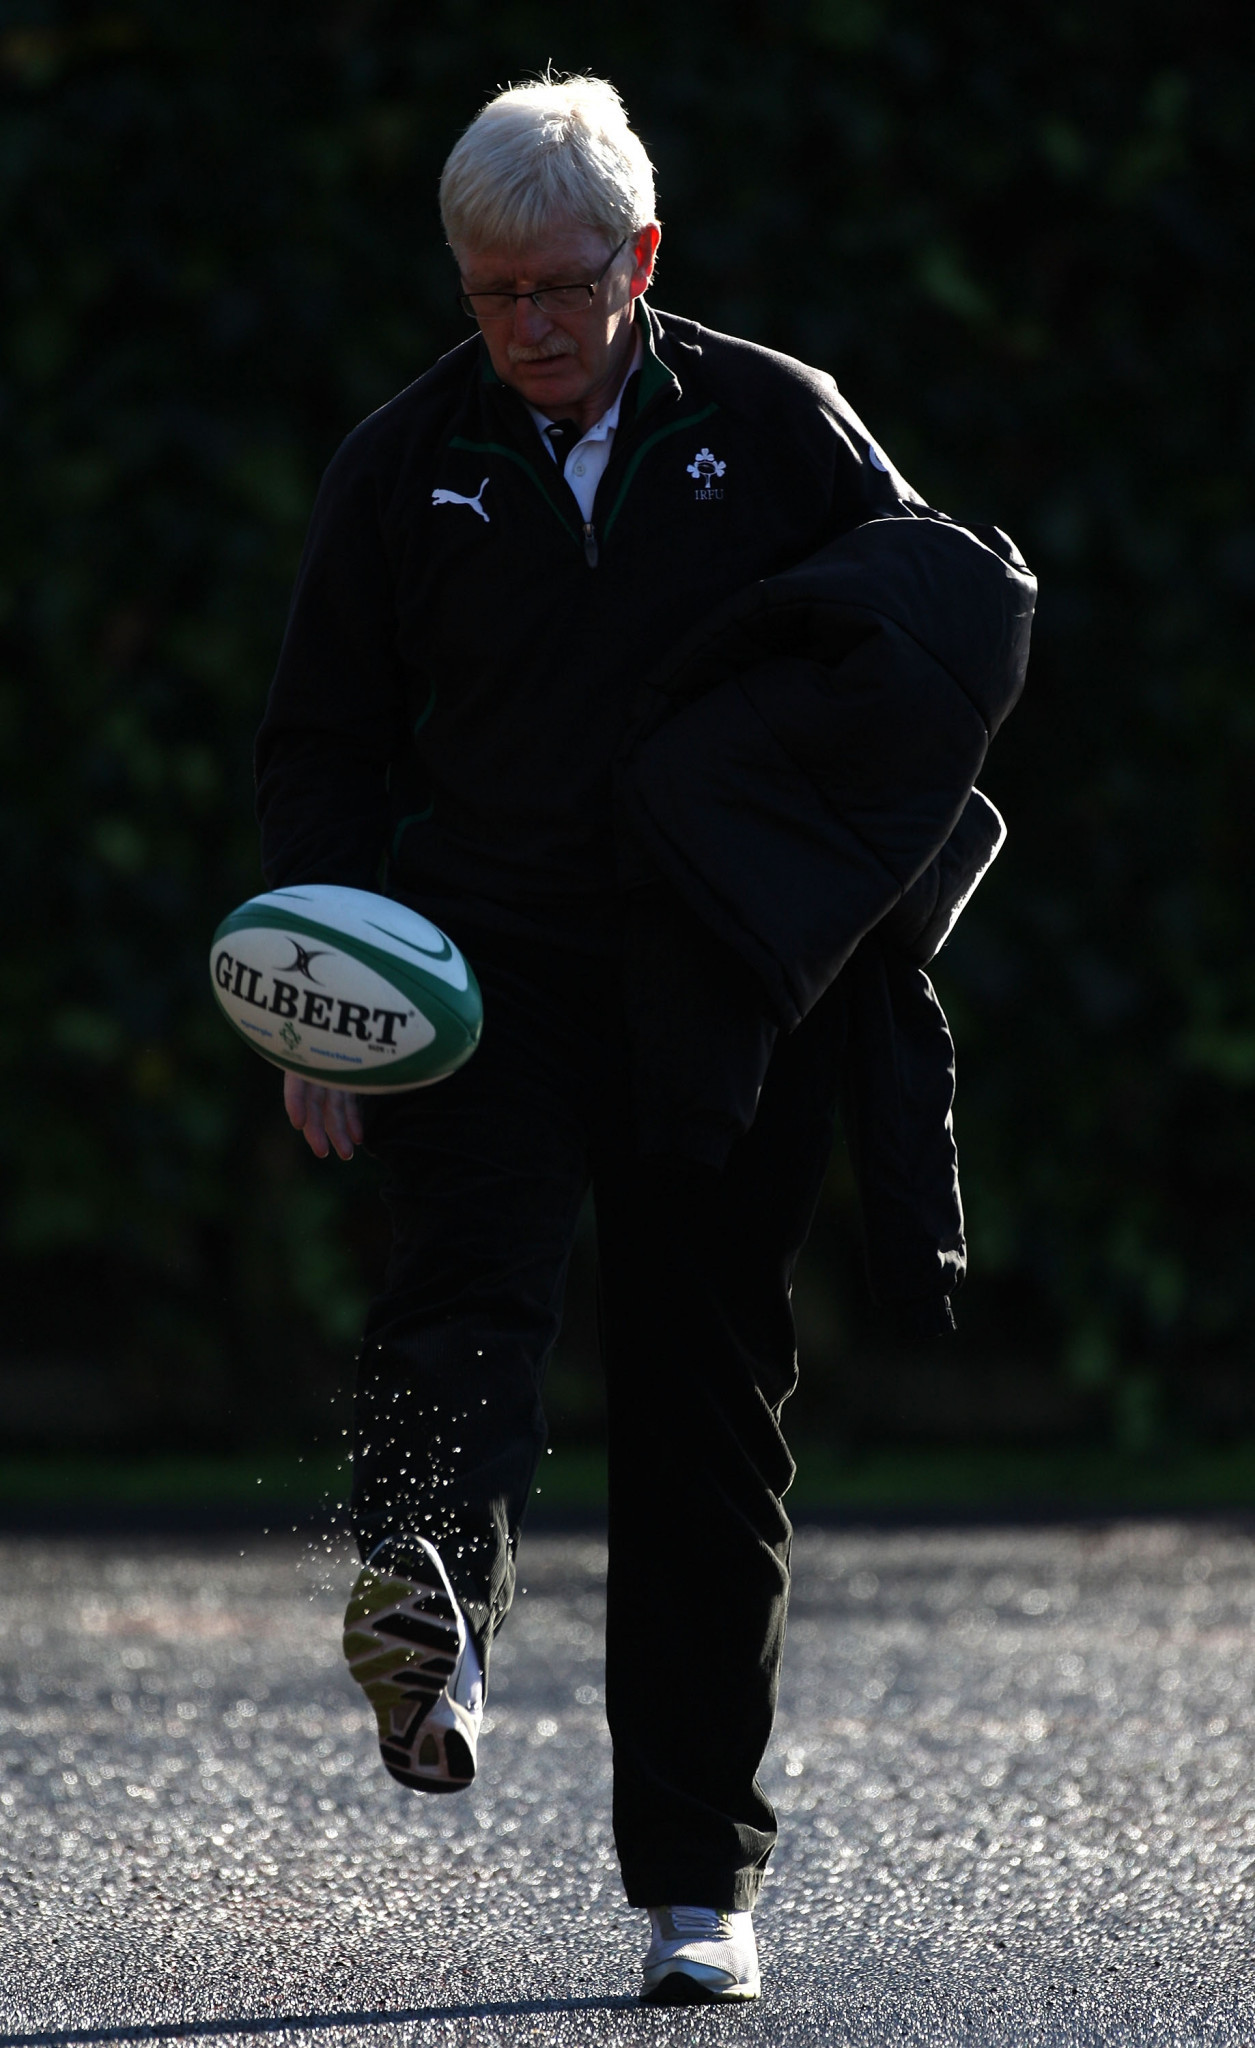 Paul McNaughton was team manager of Ireland's rugby team between 2008 and 2011 ©Getty Images